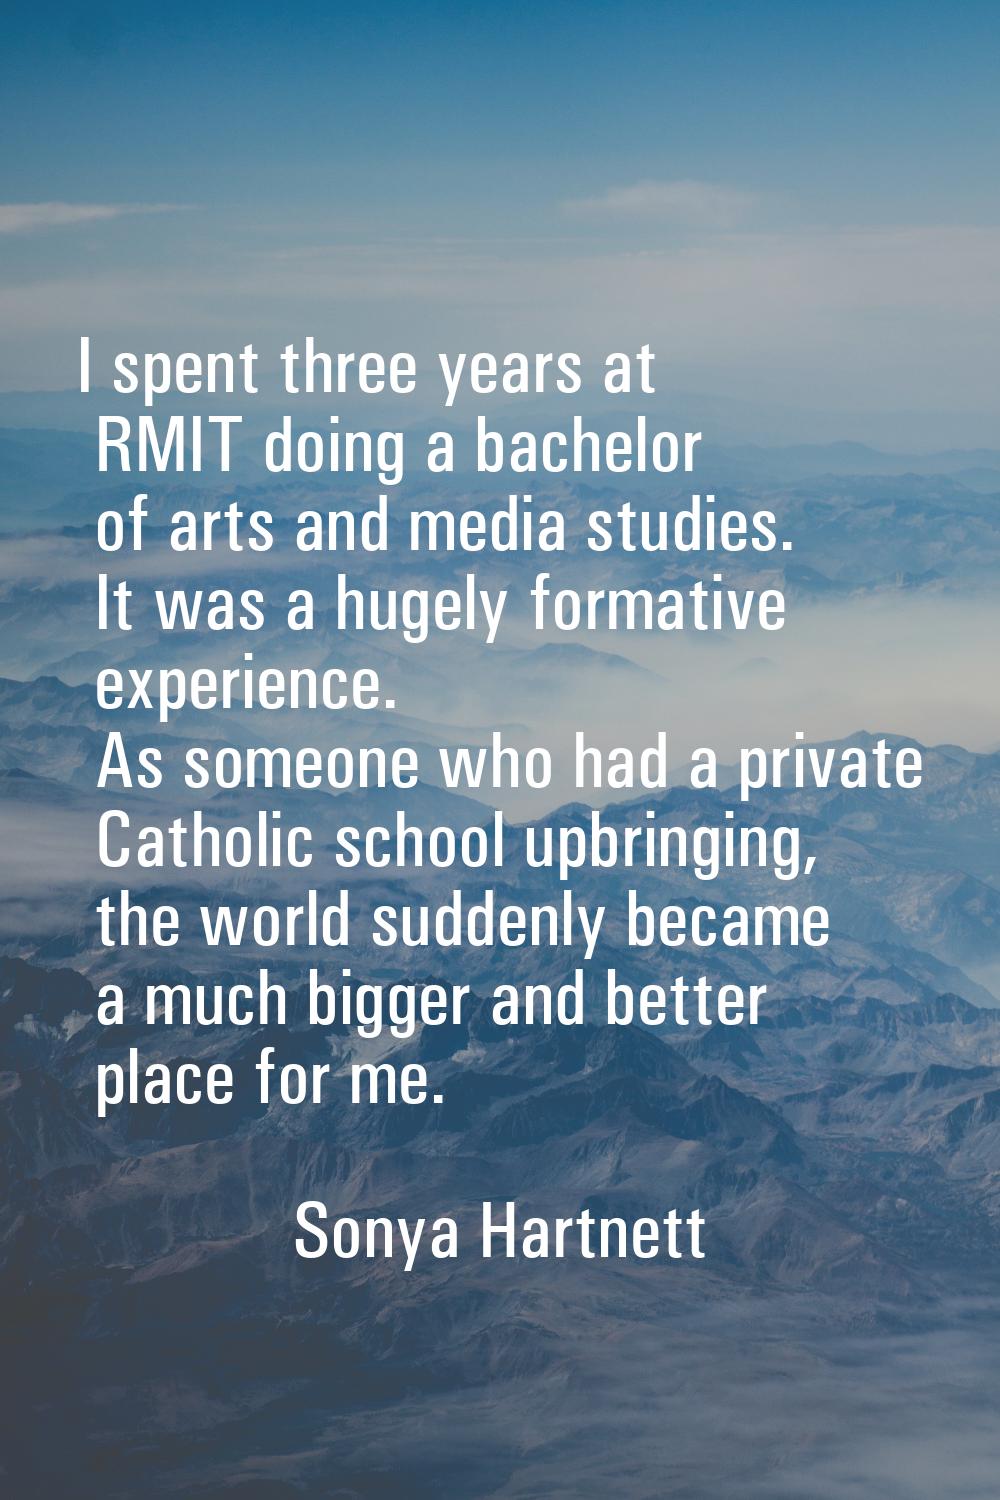 I spent three years at RMIT doing a bachelor of arts and media studies. It was a hugely formative e